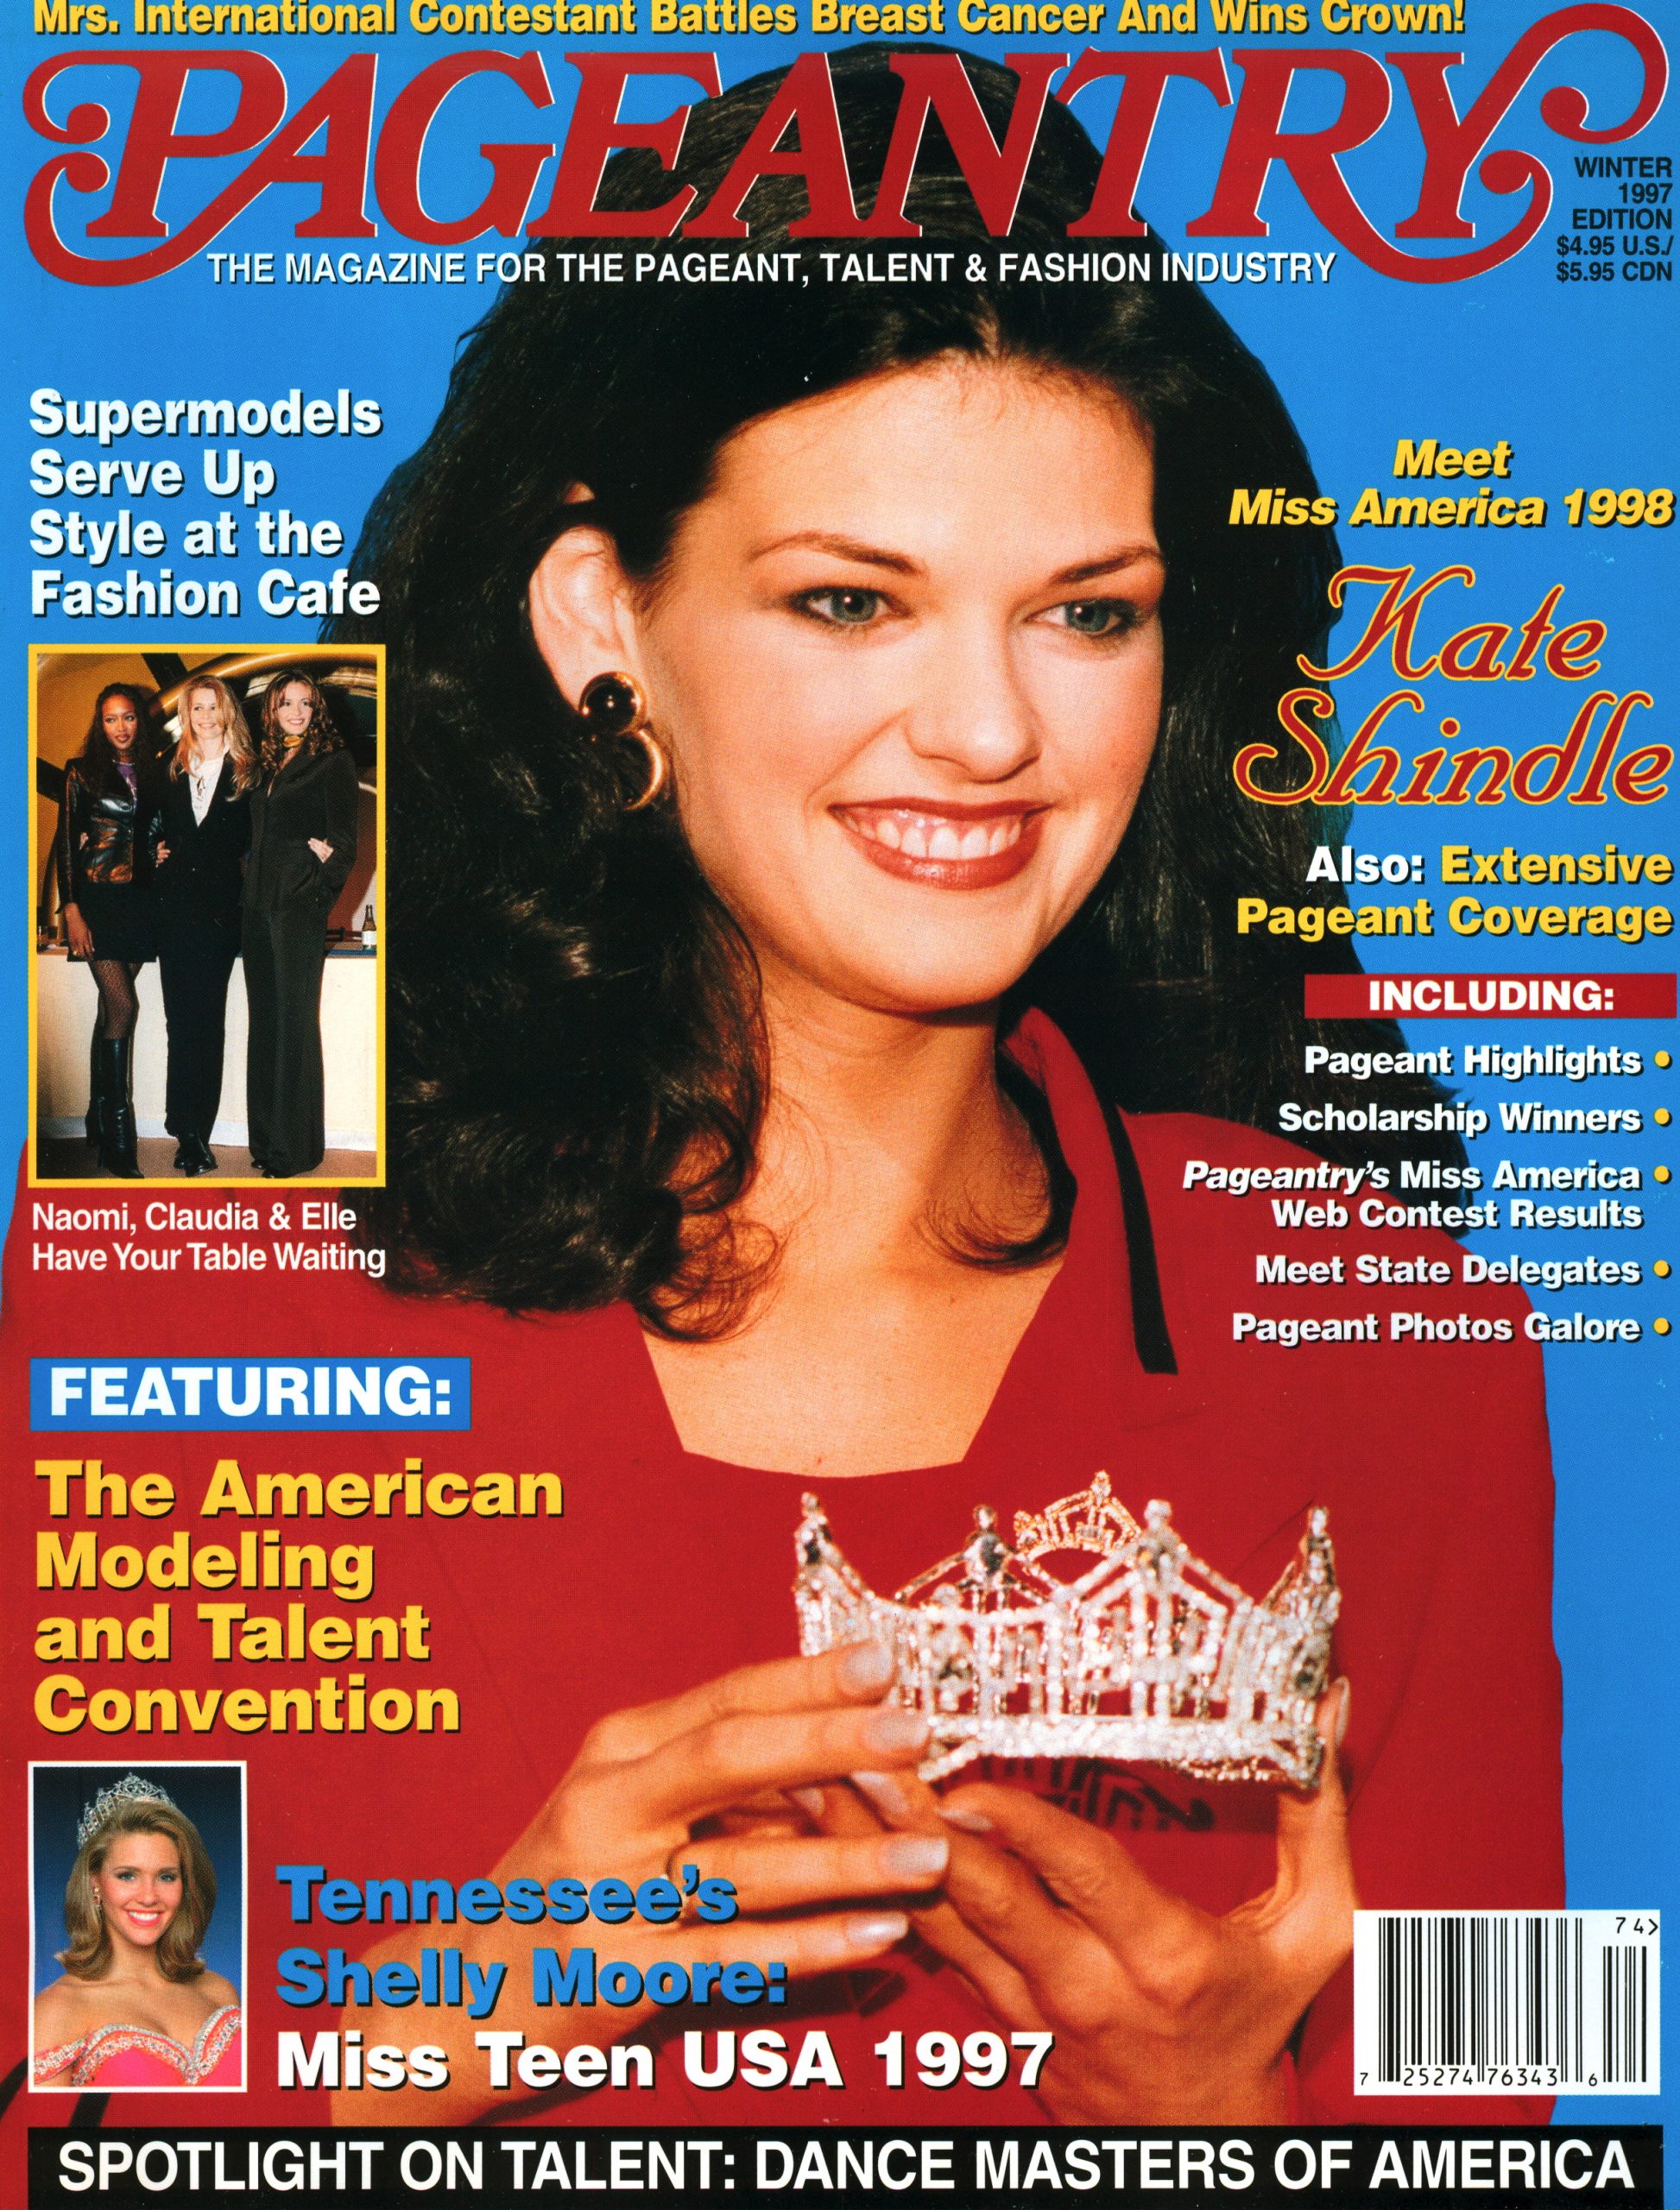 pageantry magazine, pageantry, kate shindle, miss america, shelly moore, teen usa, supermodels, Naomi Campbell, Claudia Schiffer, Elle Macpherson, mrs international